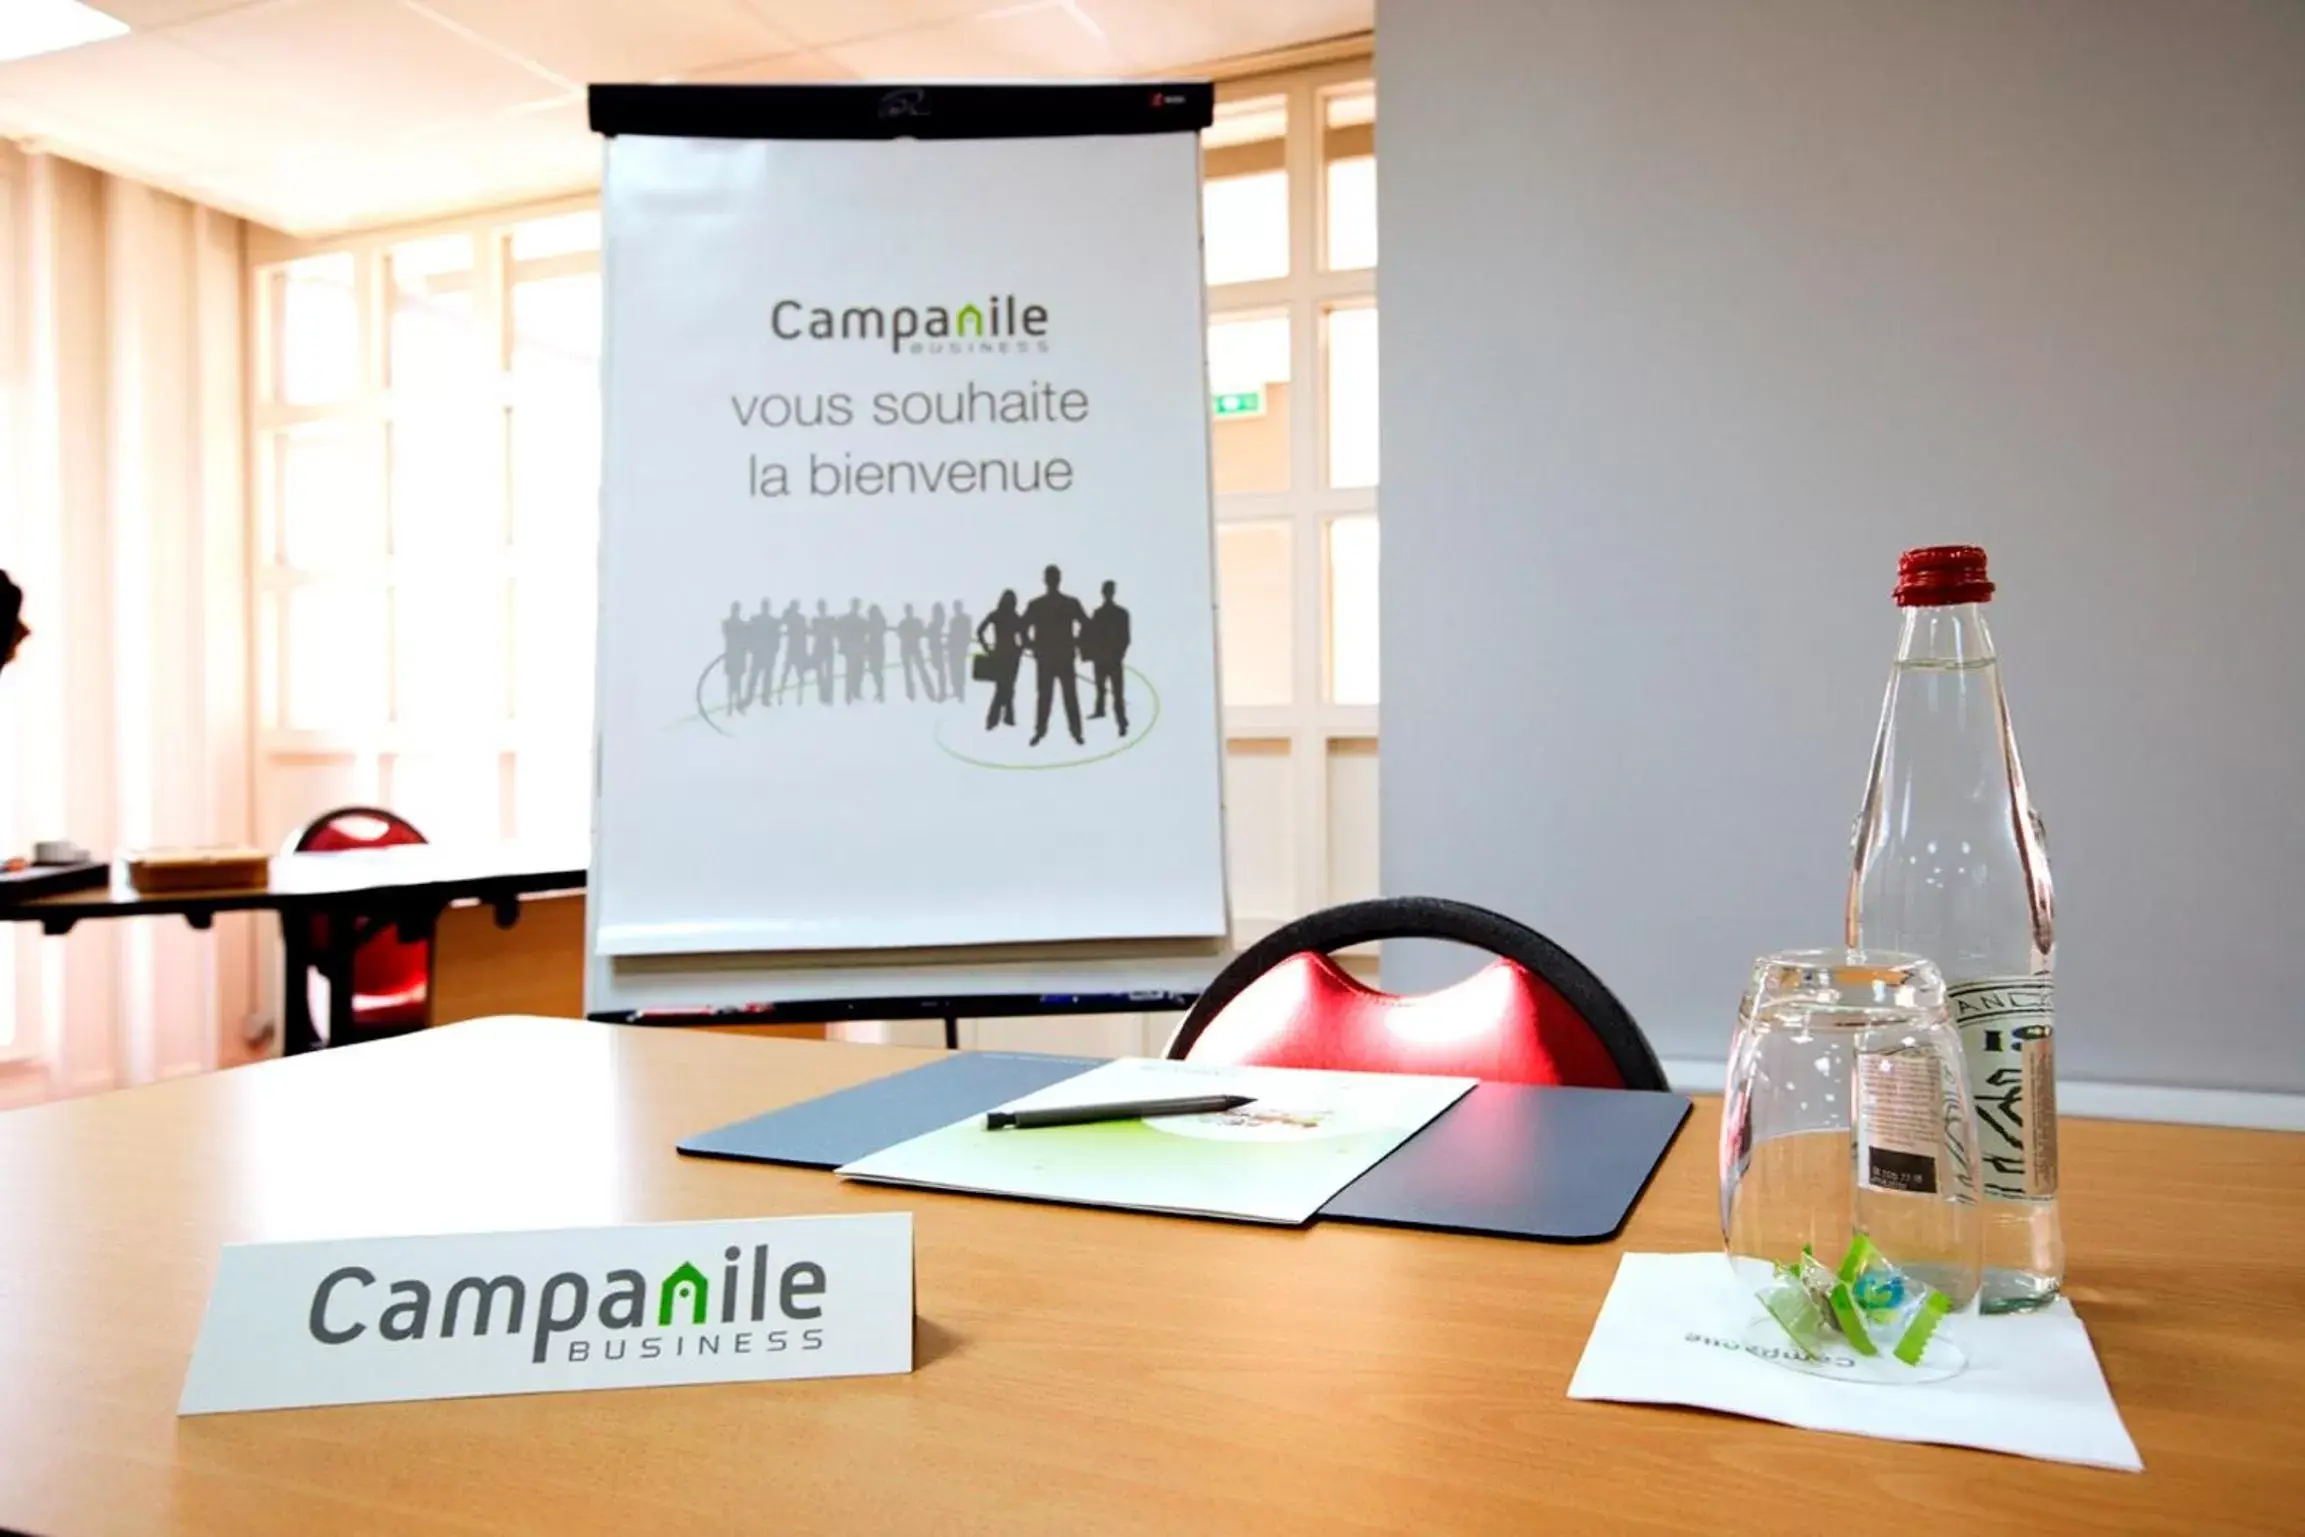 Business facilities in Campanile Marne la Vallée - Bussy Saint-Georges